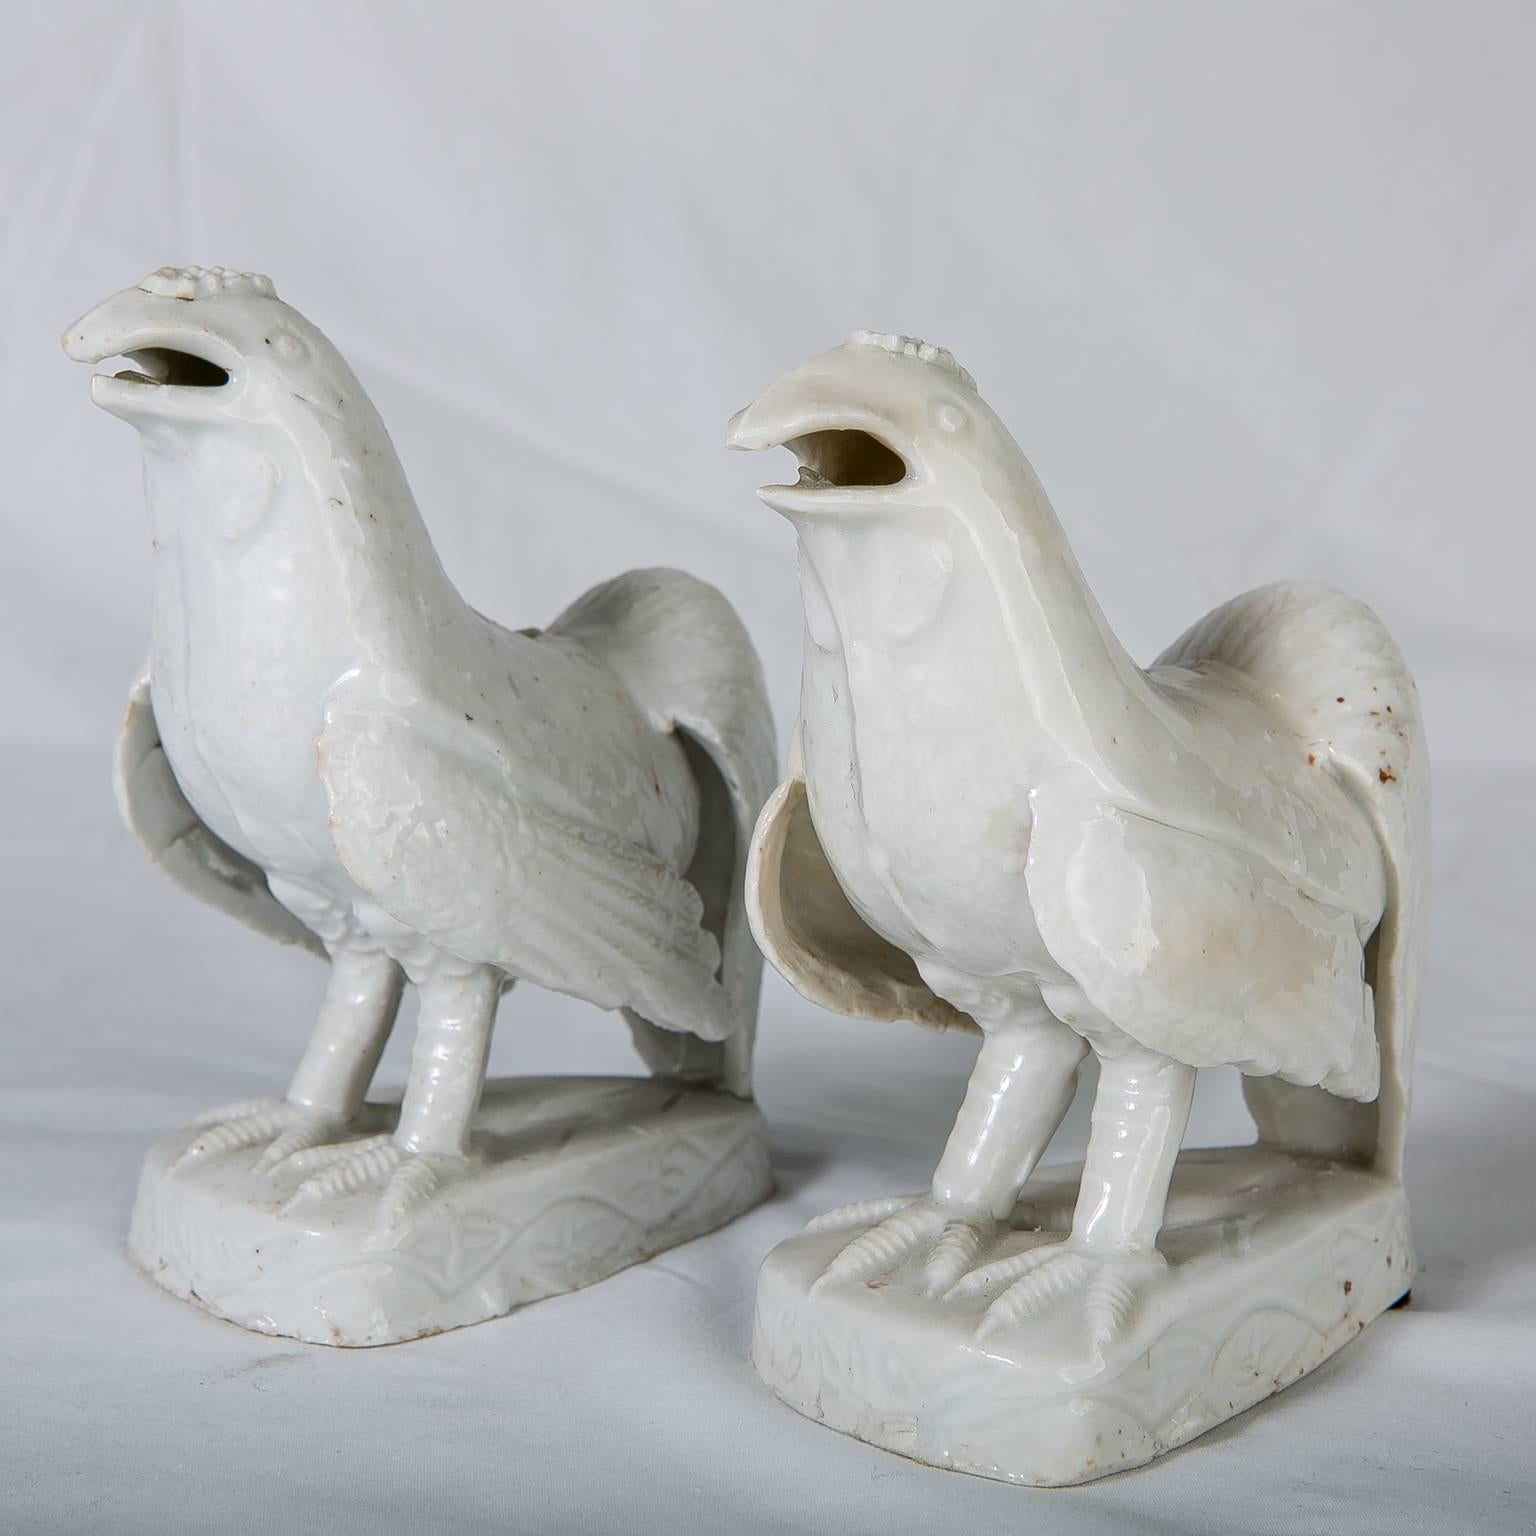 Pair of Blanc de Chine porcelain roosters with detailed feathers on the body and tail. They are modeled standing on a traditional shaped raised base. Like these roosters, Blanc de Chine figures are typically not decorated.
Blanc de Chine refers to